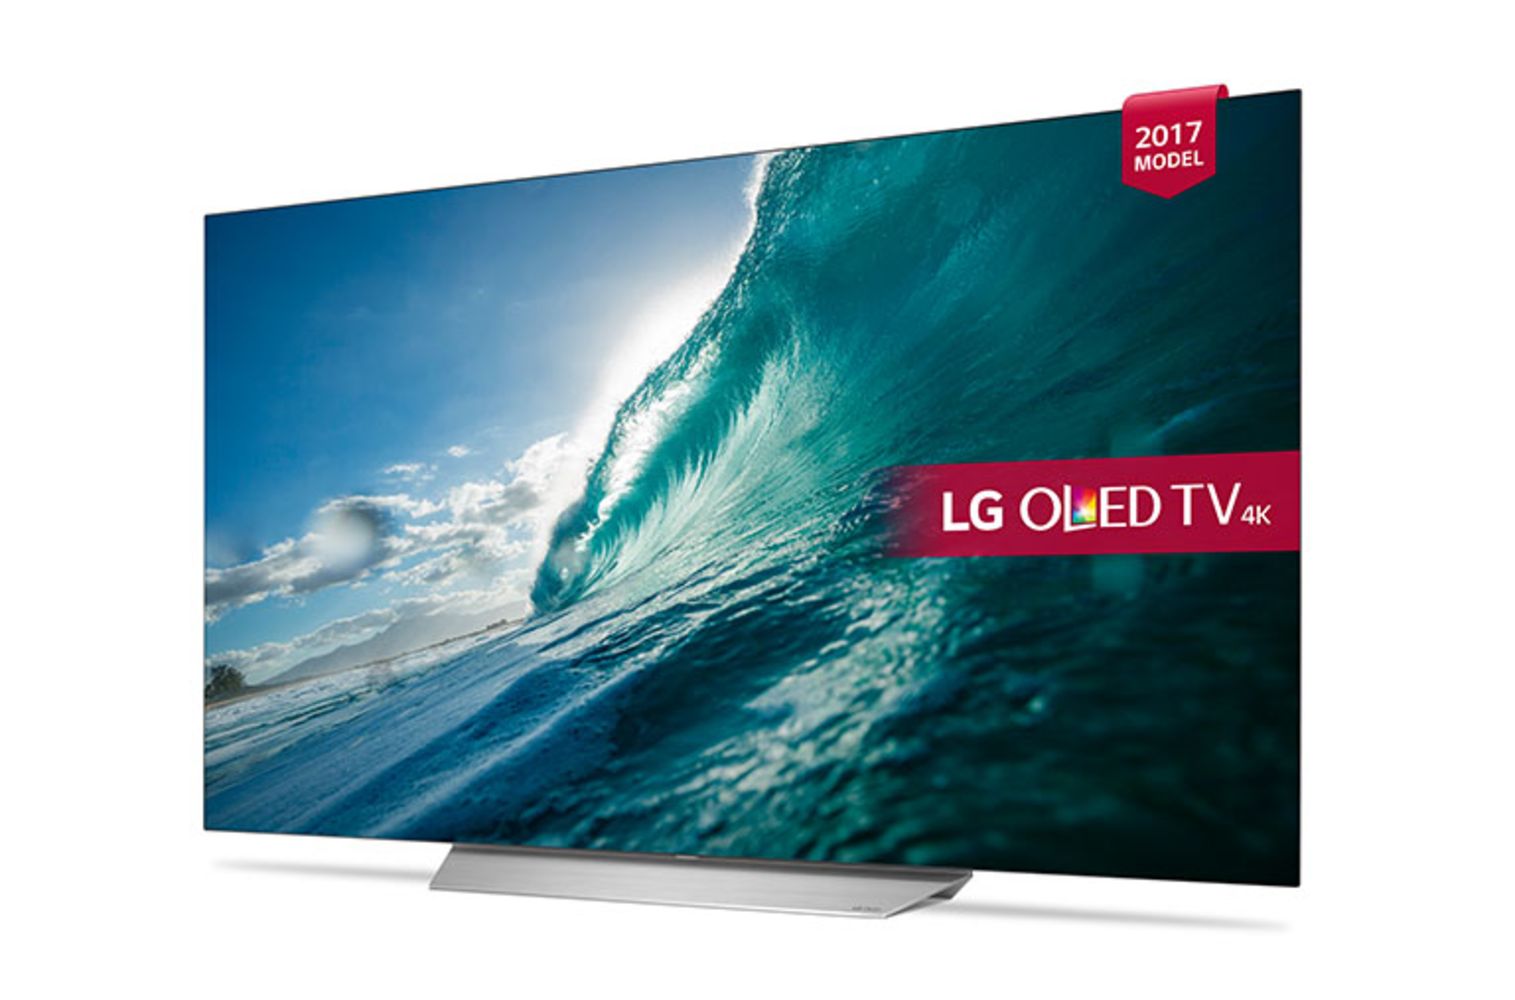 Clearance of LG TVs & Monitors - Including 4K UHD Smart TVs In A Range Of Sizes, HD Monitors And Ultra-Wide Gaming Monitors